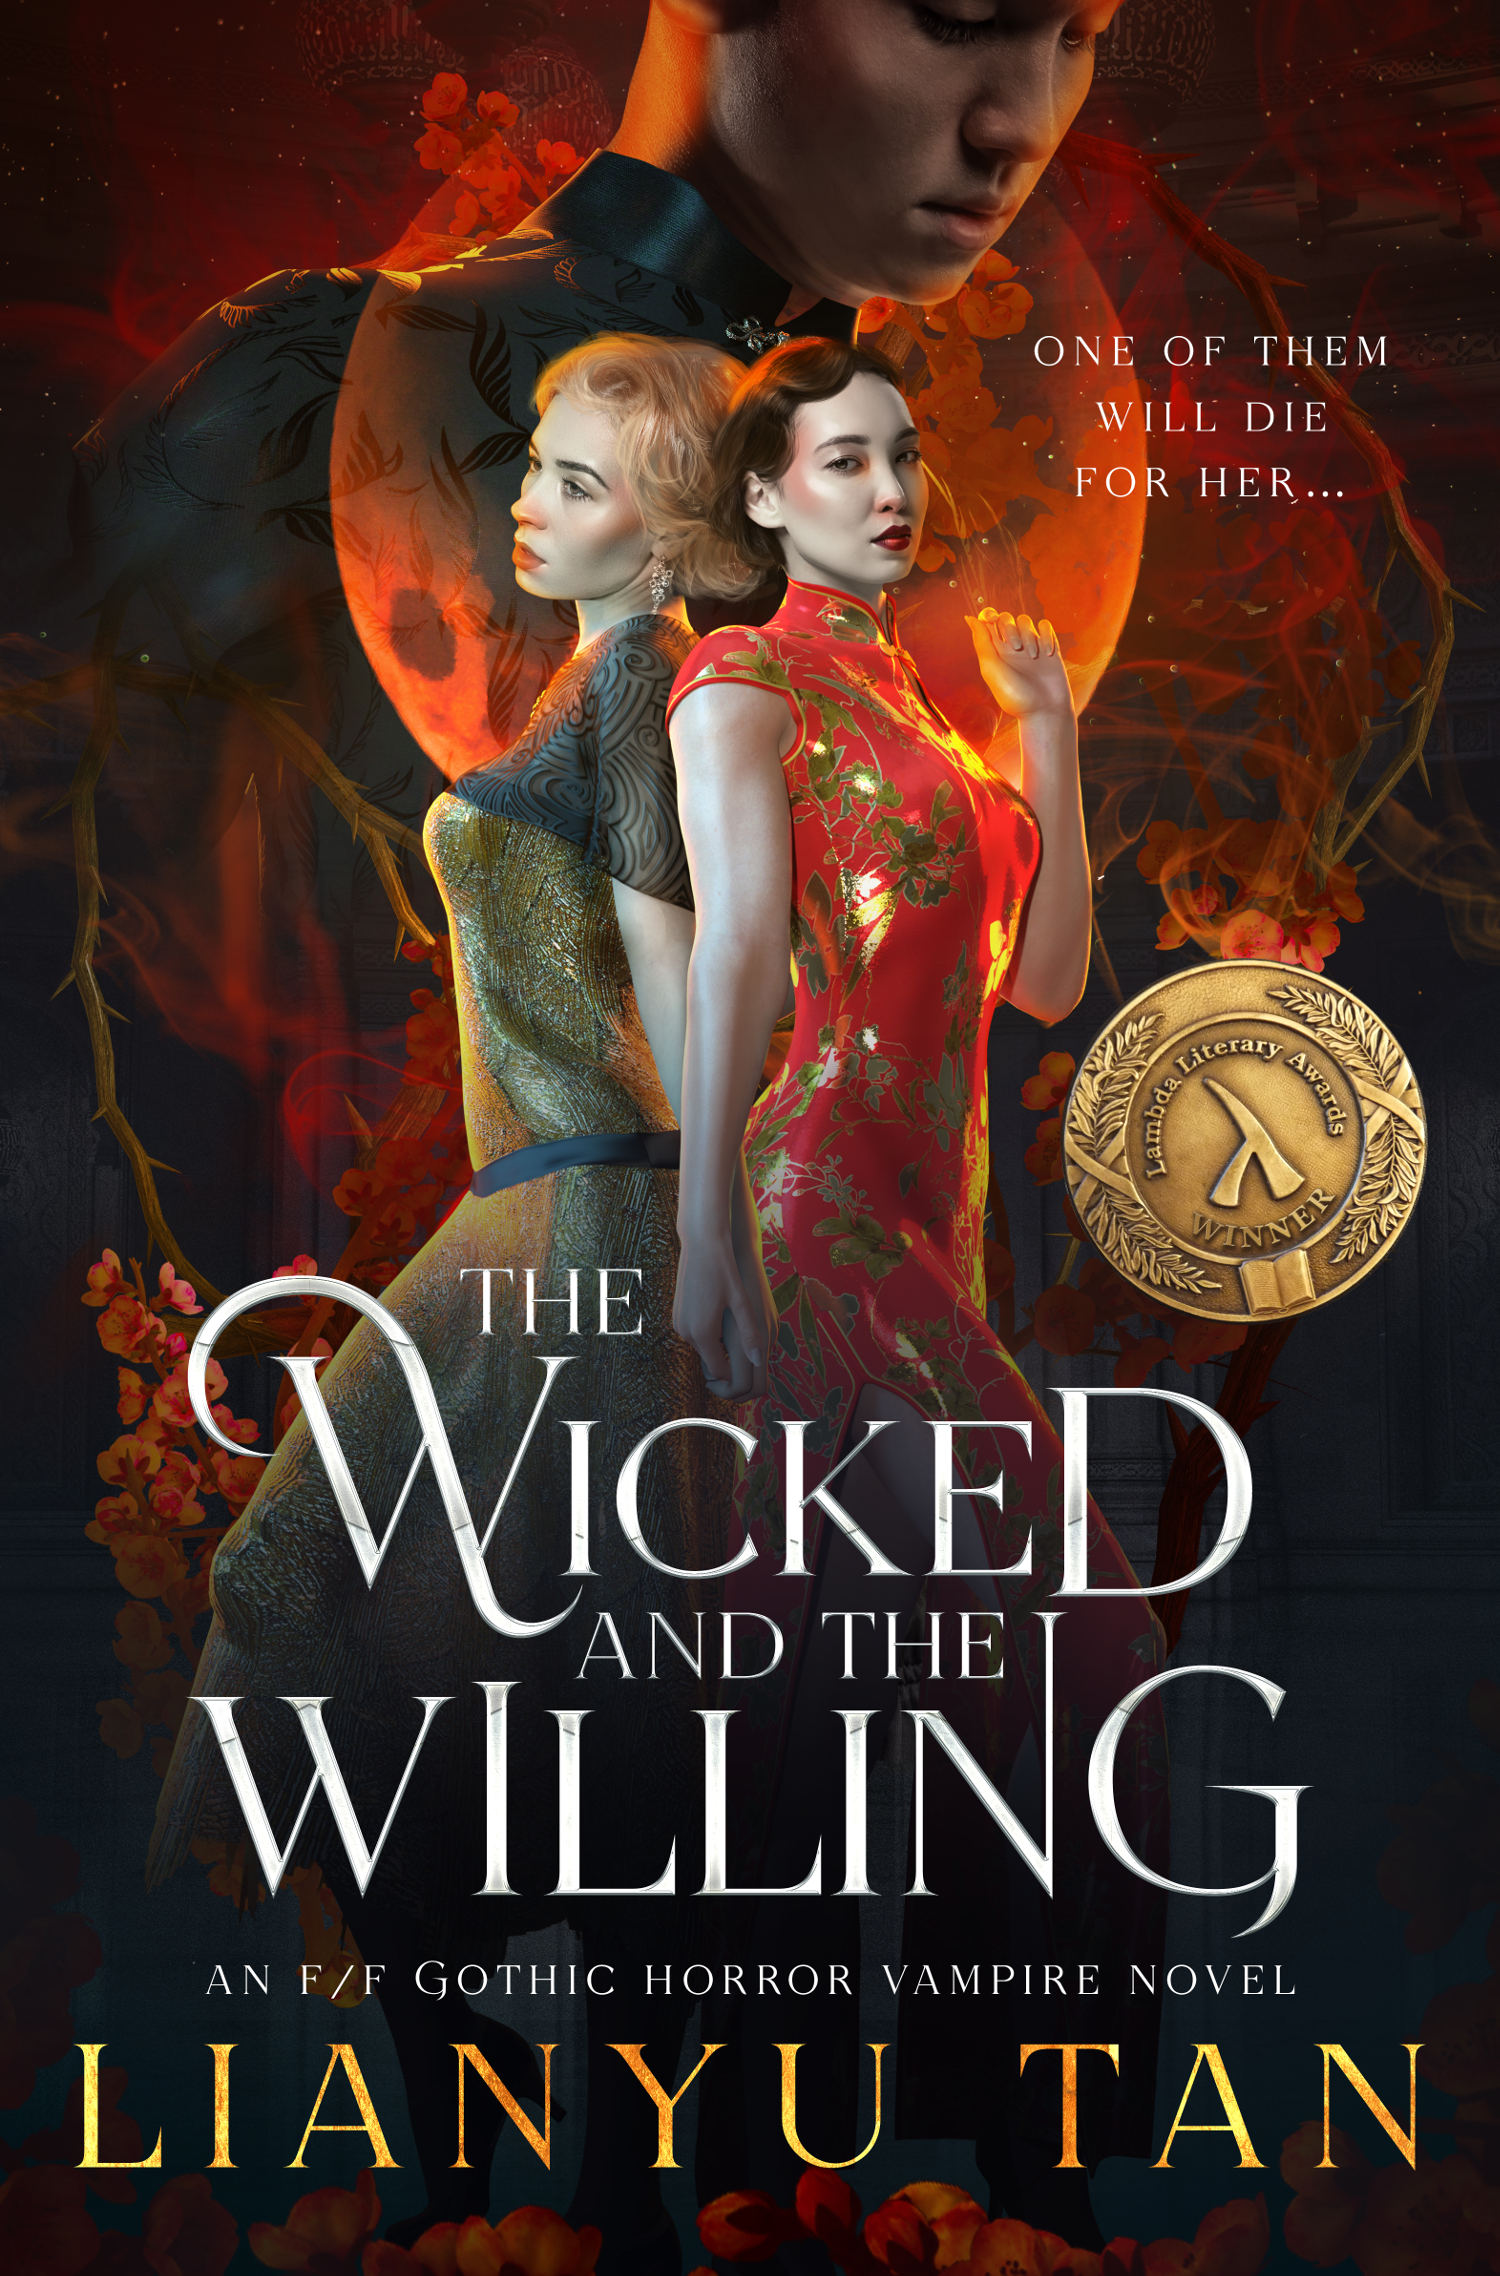 Book cover: The Wicked and the Willing by Lianyu Tan, an F/F gothic horror vampire novel. One of them will die for her... features 2 women holding hands, one Chinese and one white blonde, and a third woman's face in shadow centre. Peach blossoms and thorns line the cover.